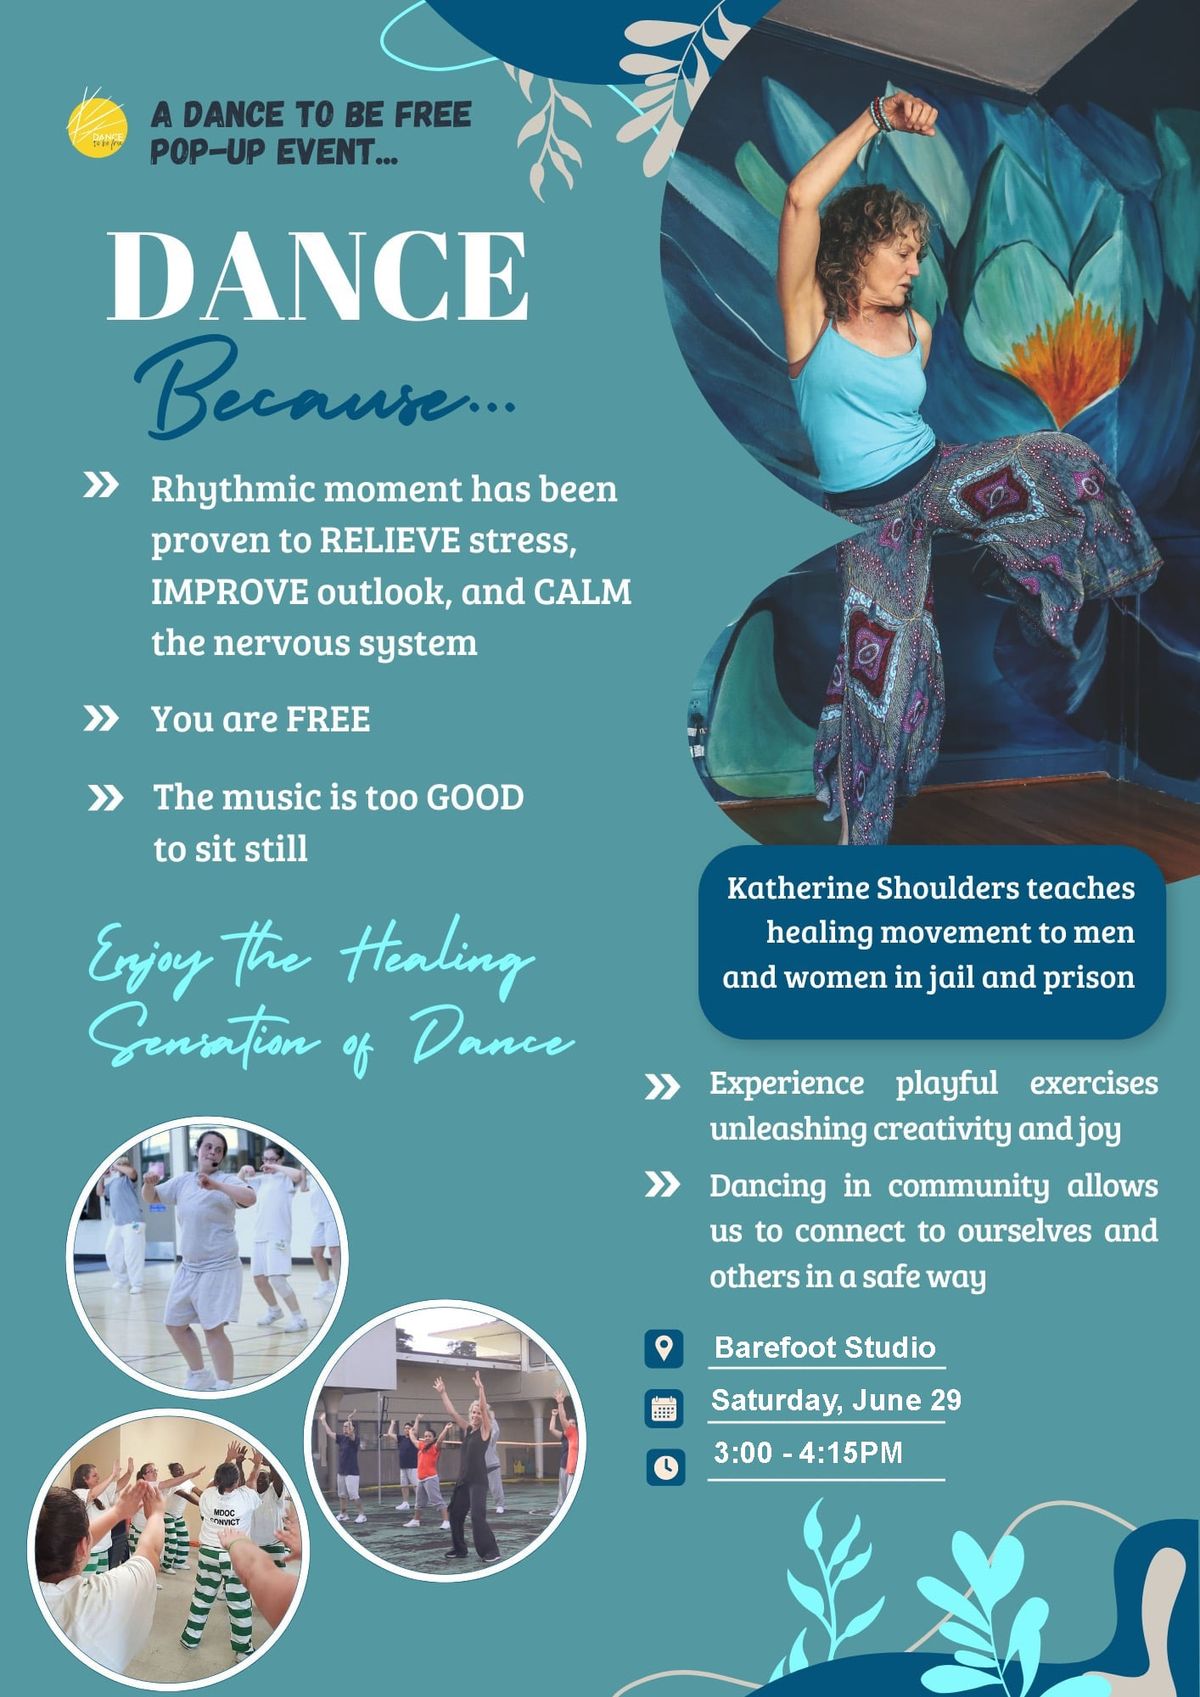 Dance To Be Free at Barefoot Studio!